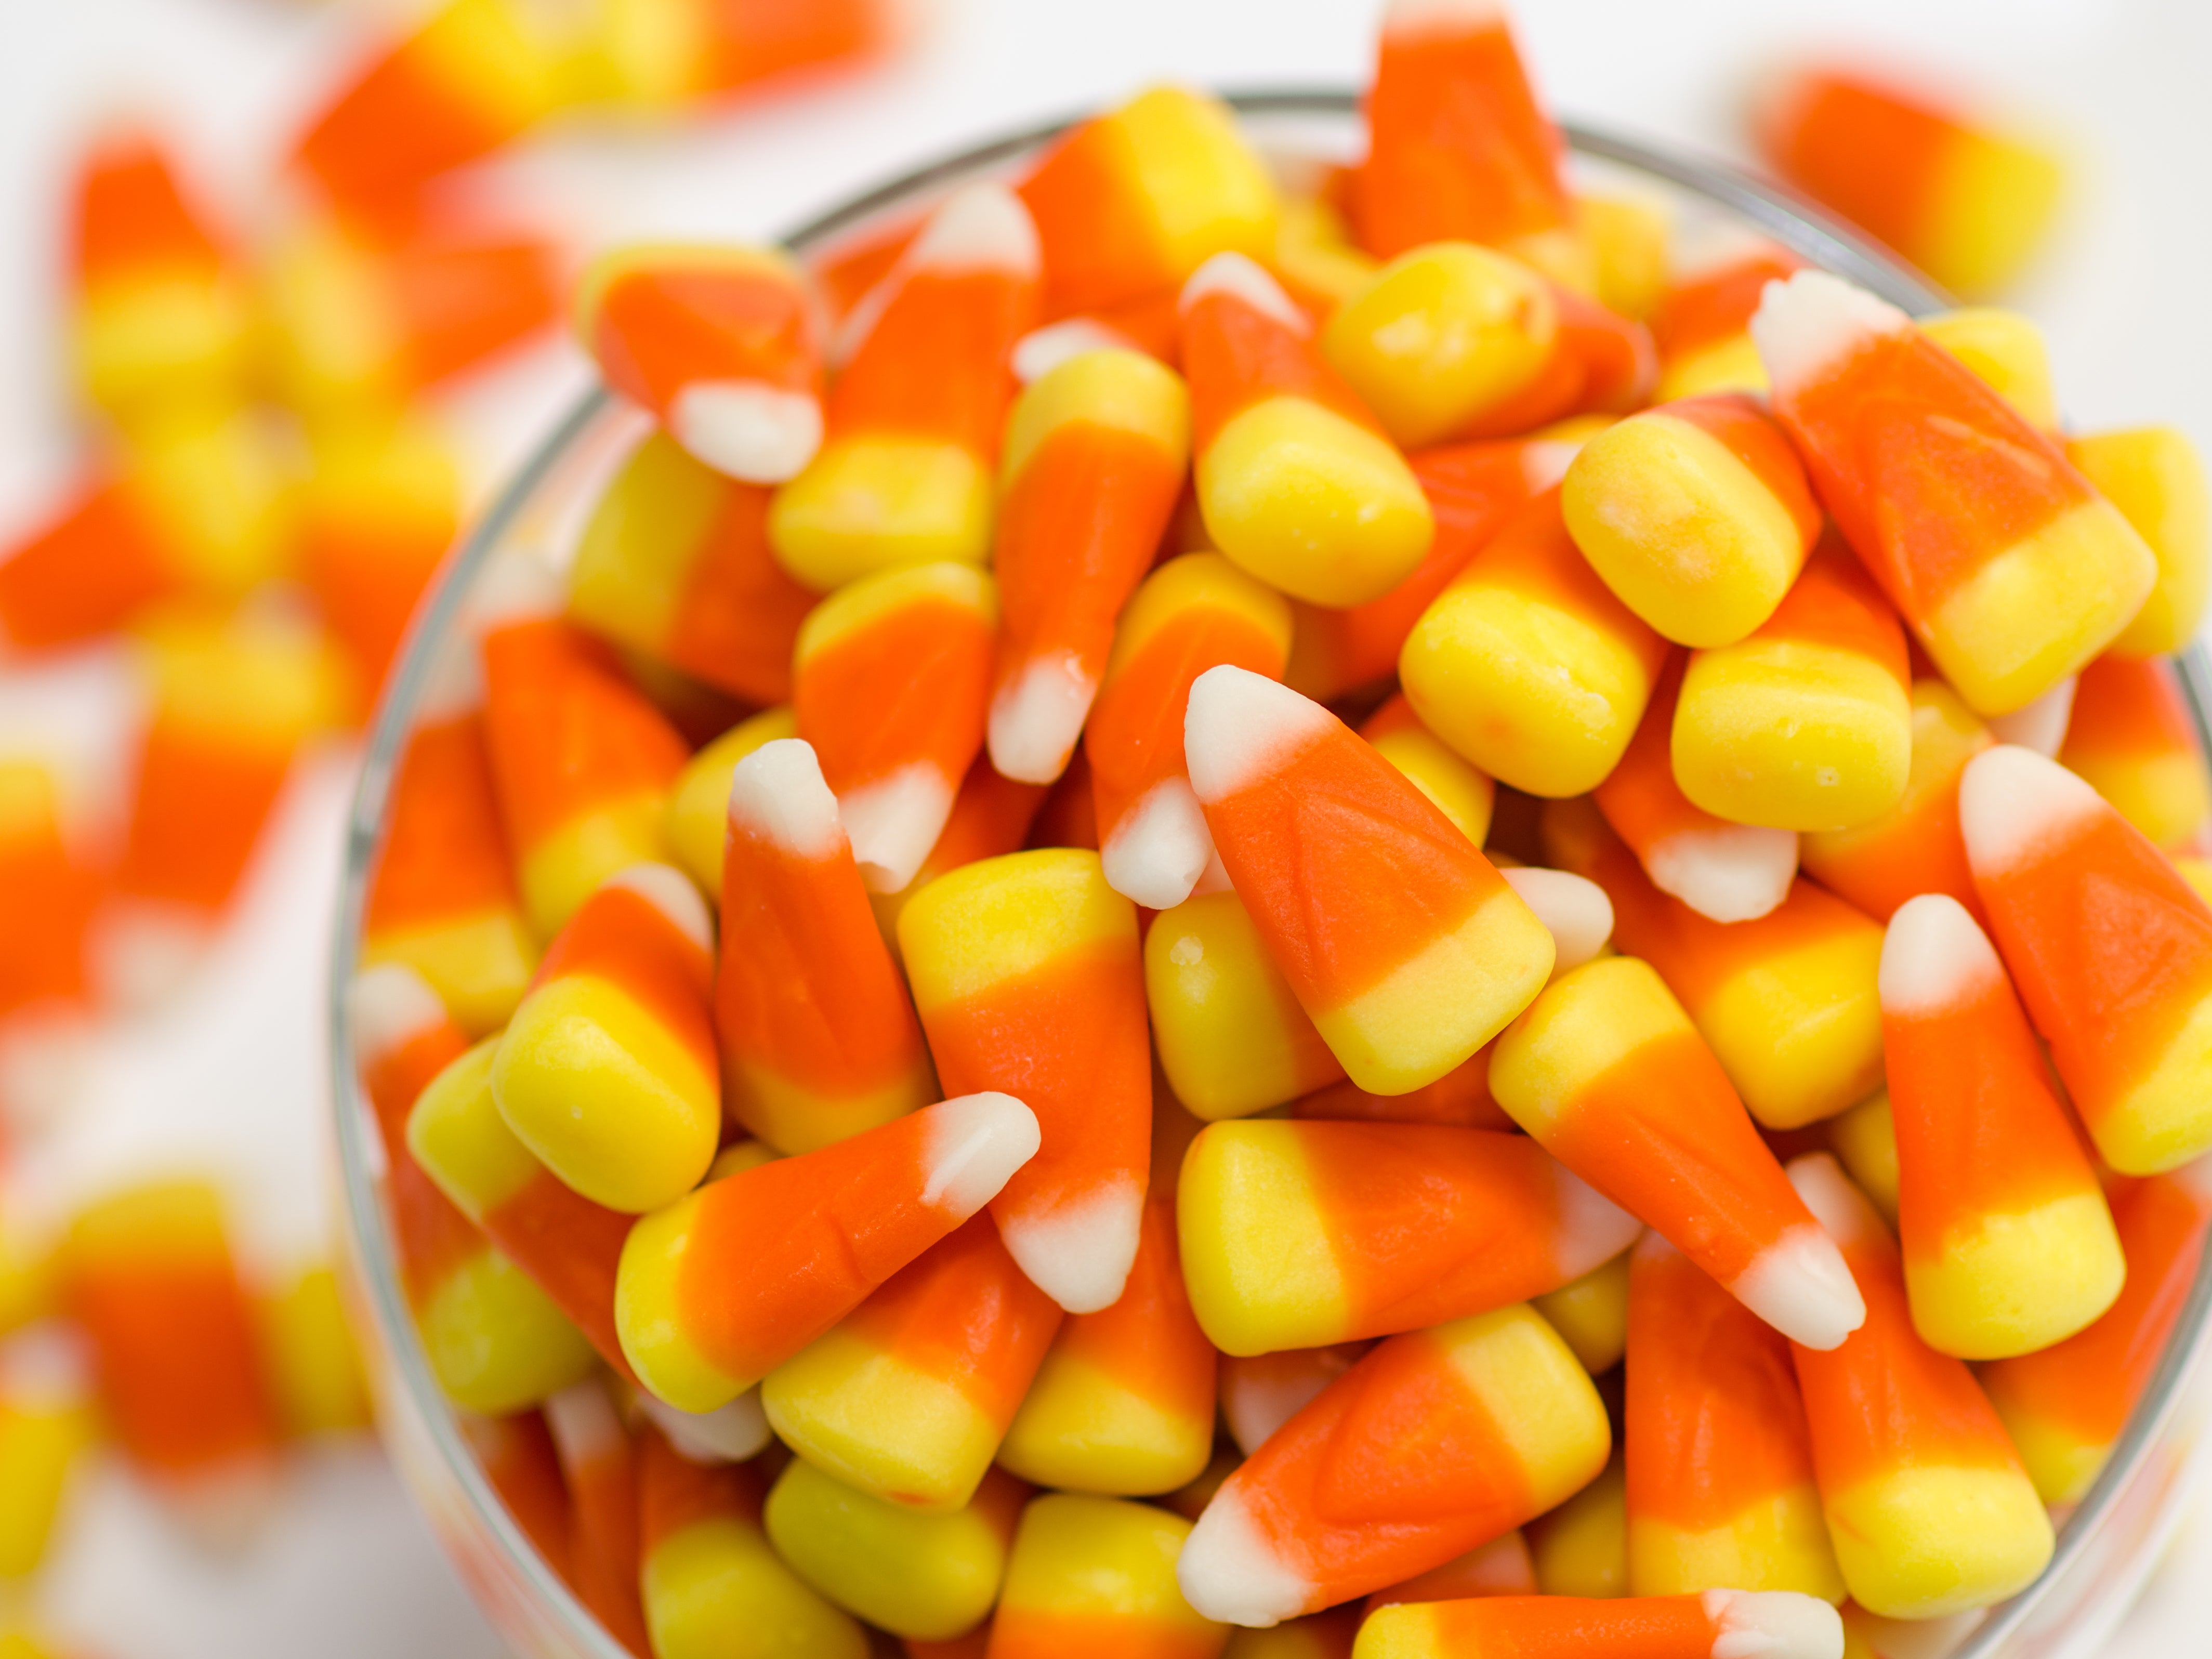 Brachs Candy Corn, Apple Mix, Packaged Candy